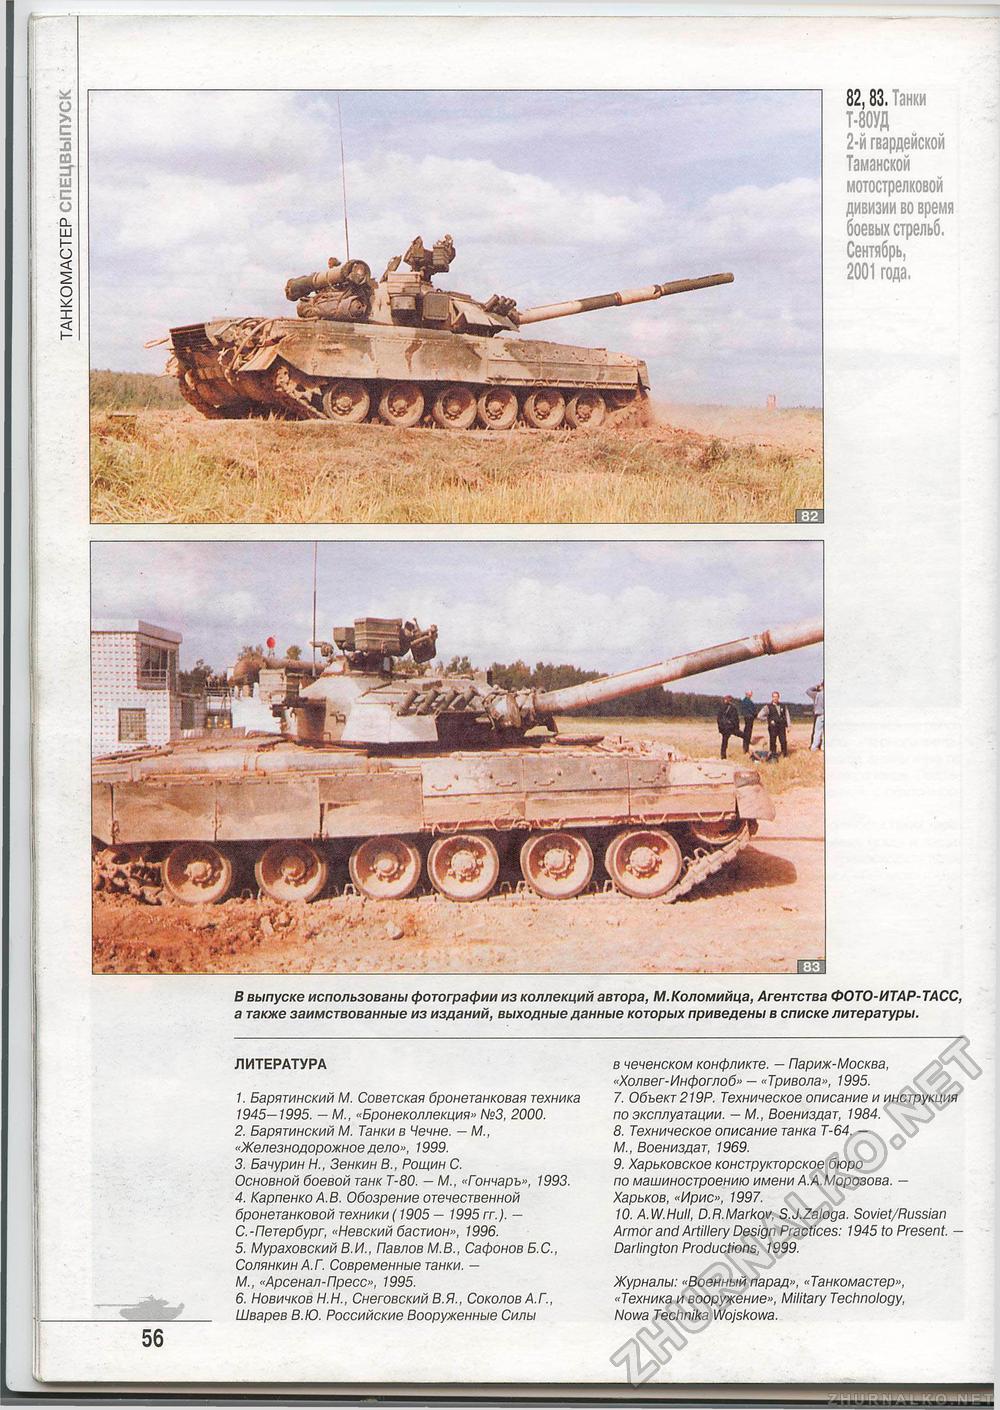  Special - T-80,  63